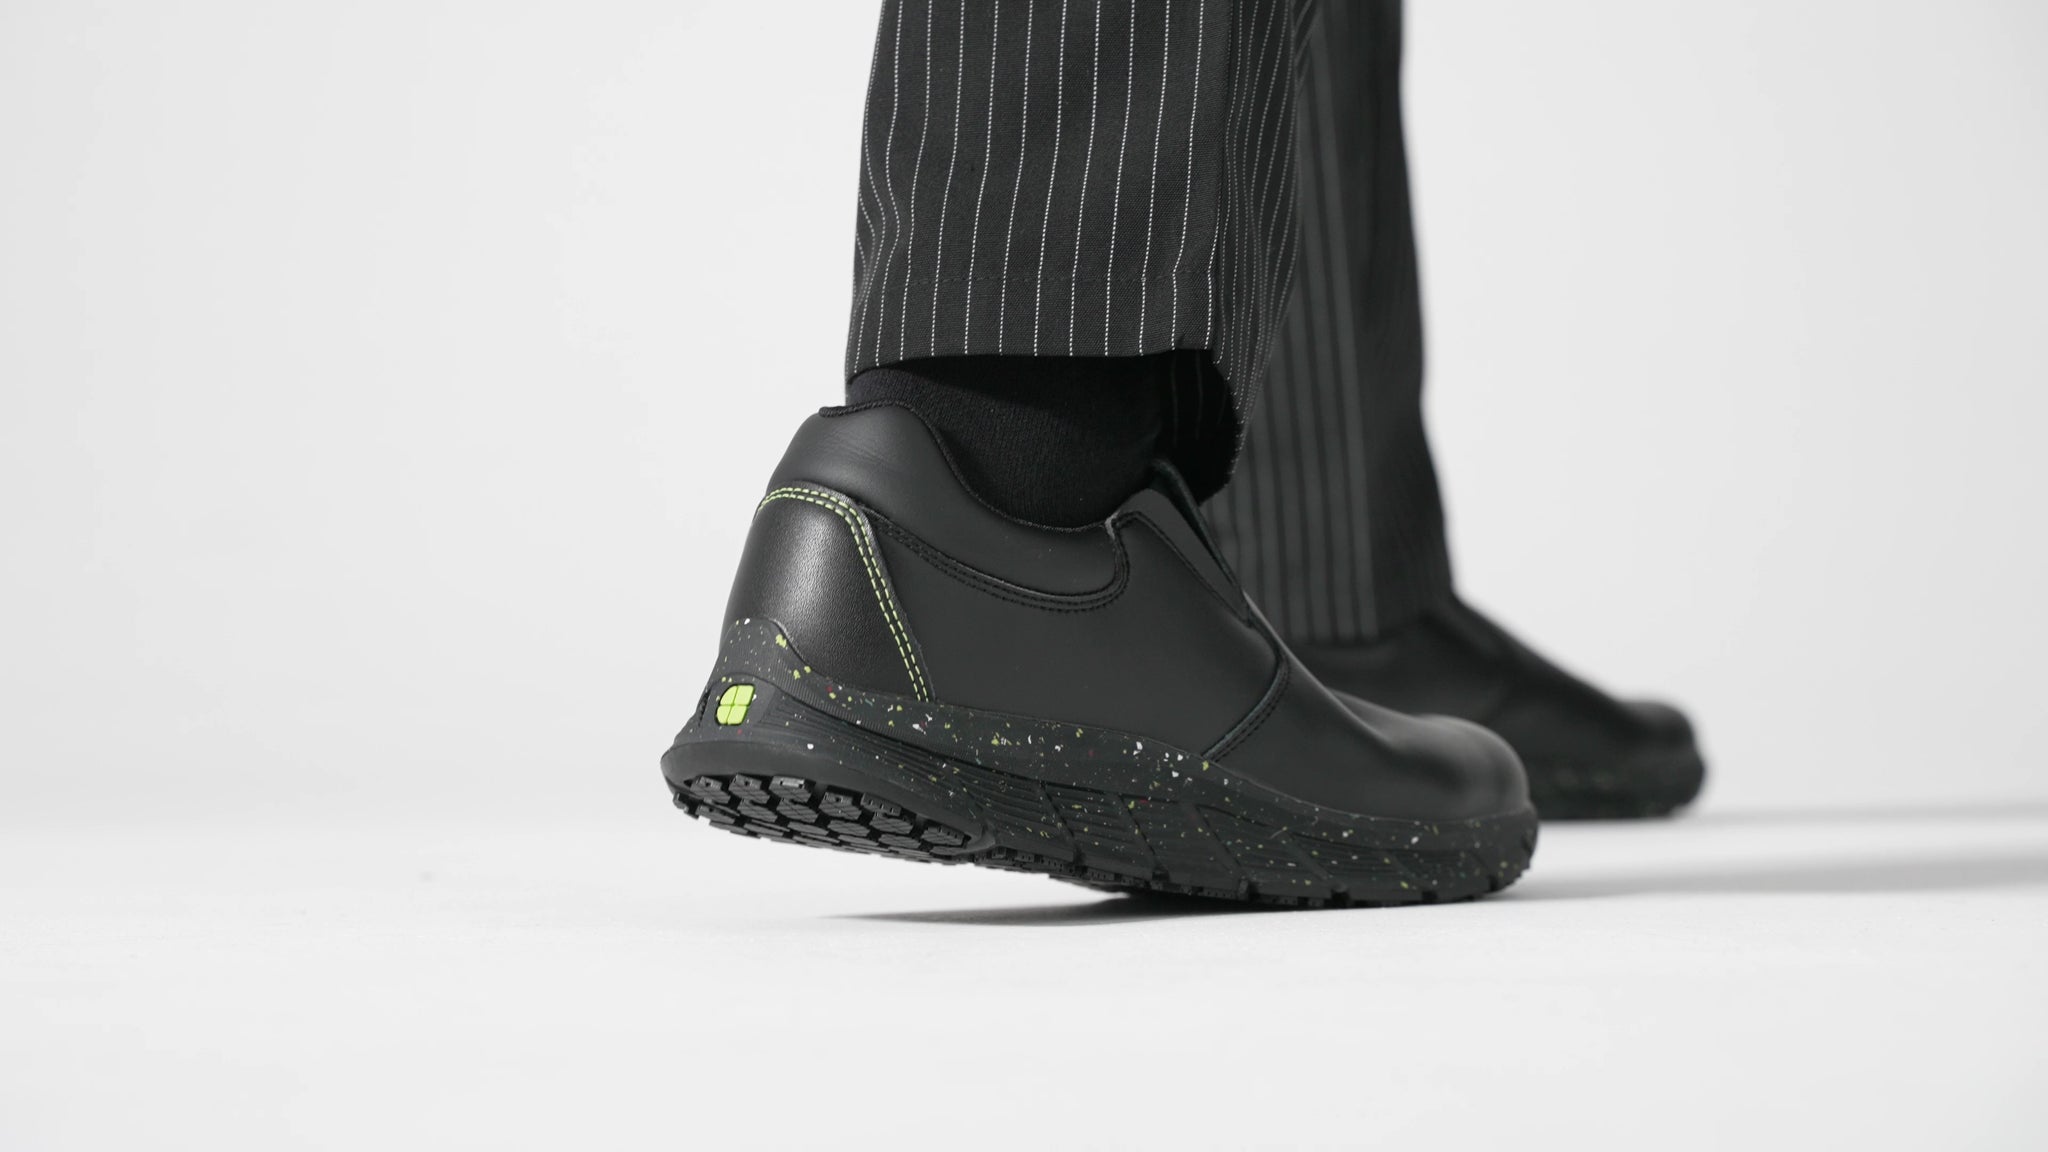 The Shoes for Crews Cater Eco Men's Black is a sustainable, slip-resistant safety shoe, product video.